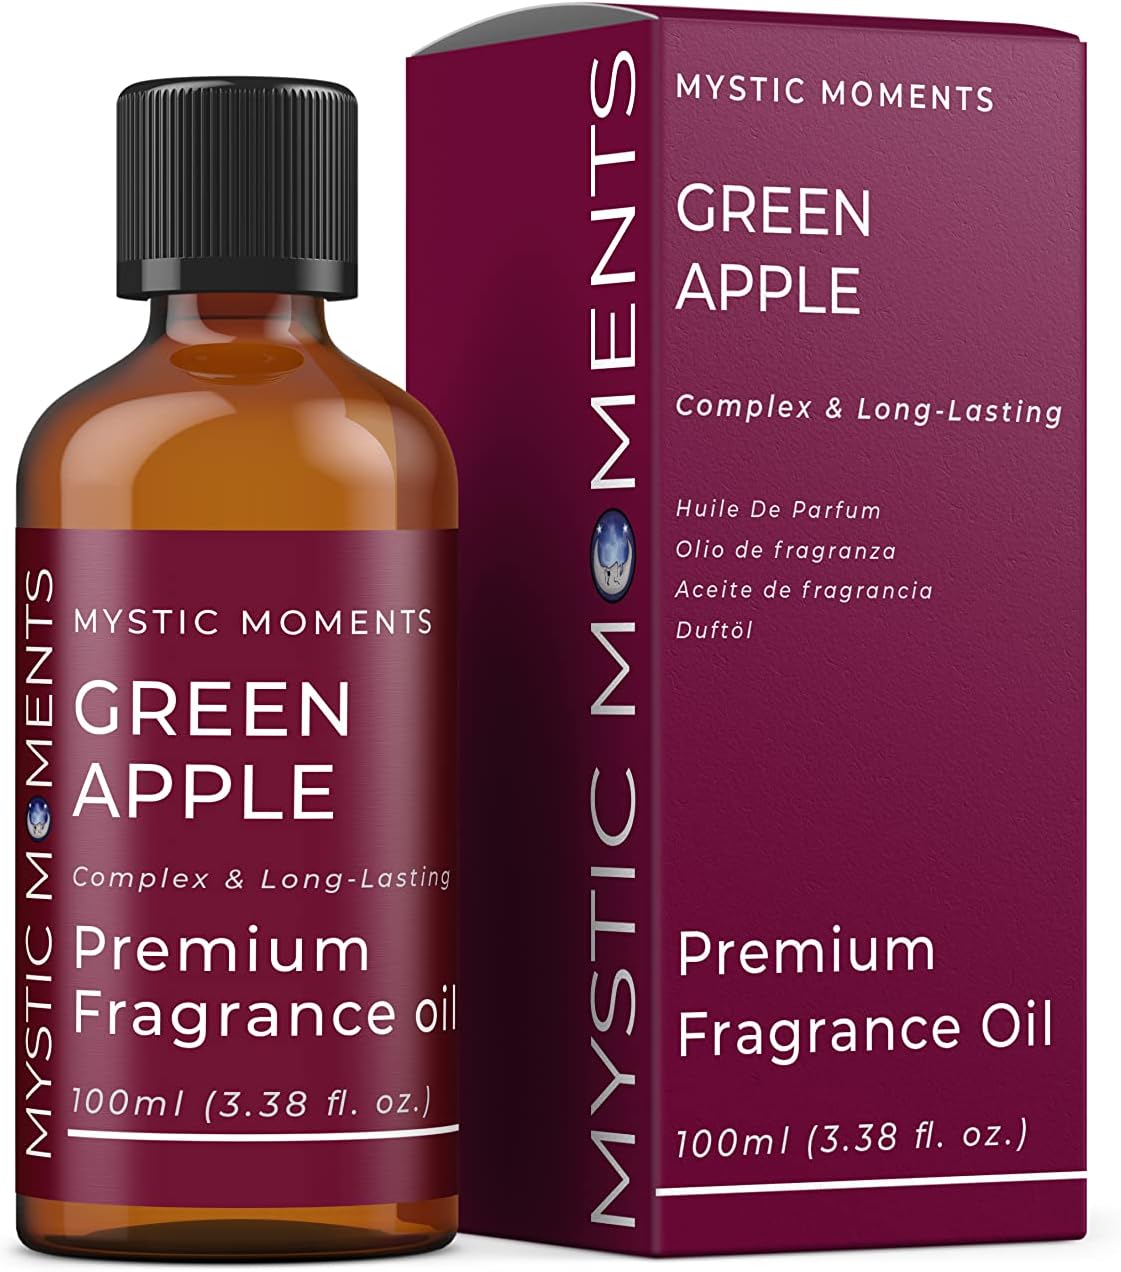 Mystic Moments | Green Apple Fragrance Oil - 100ml - Perfect for Soaps, Candles, Bath Bombs, Oil Burners, Diffusers and Skin & Hair Care Items